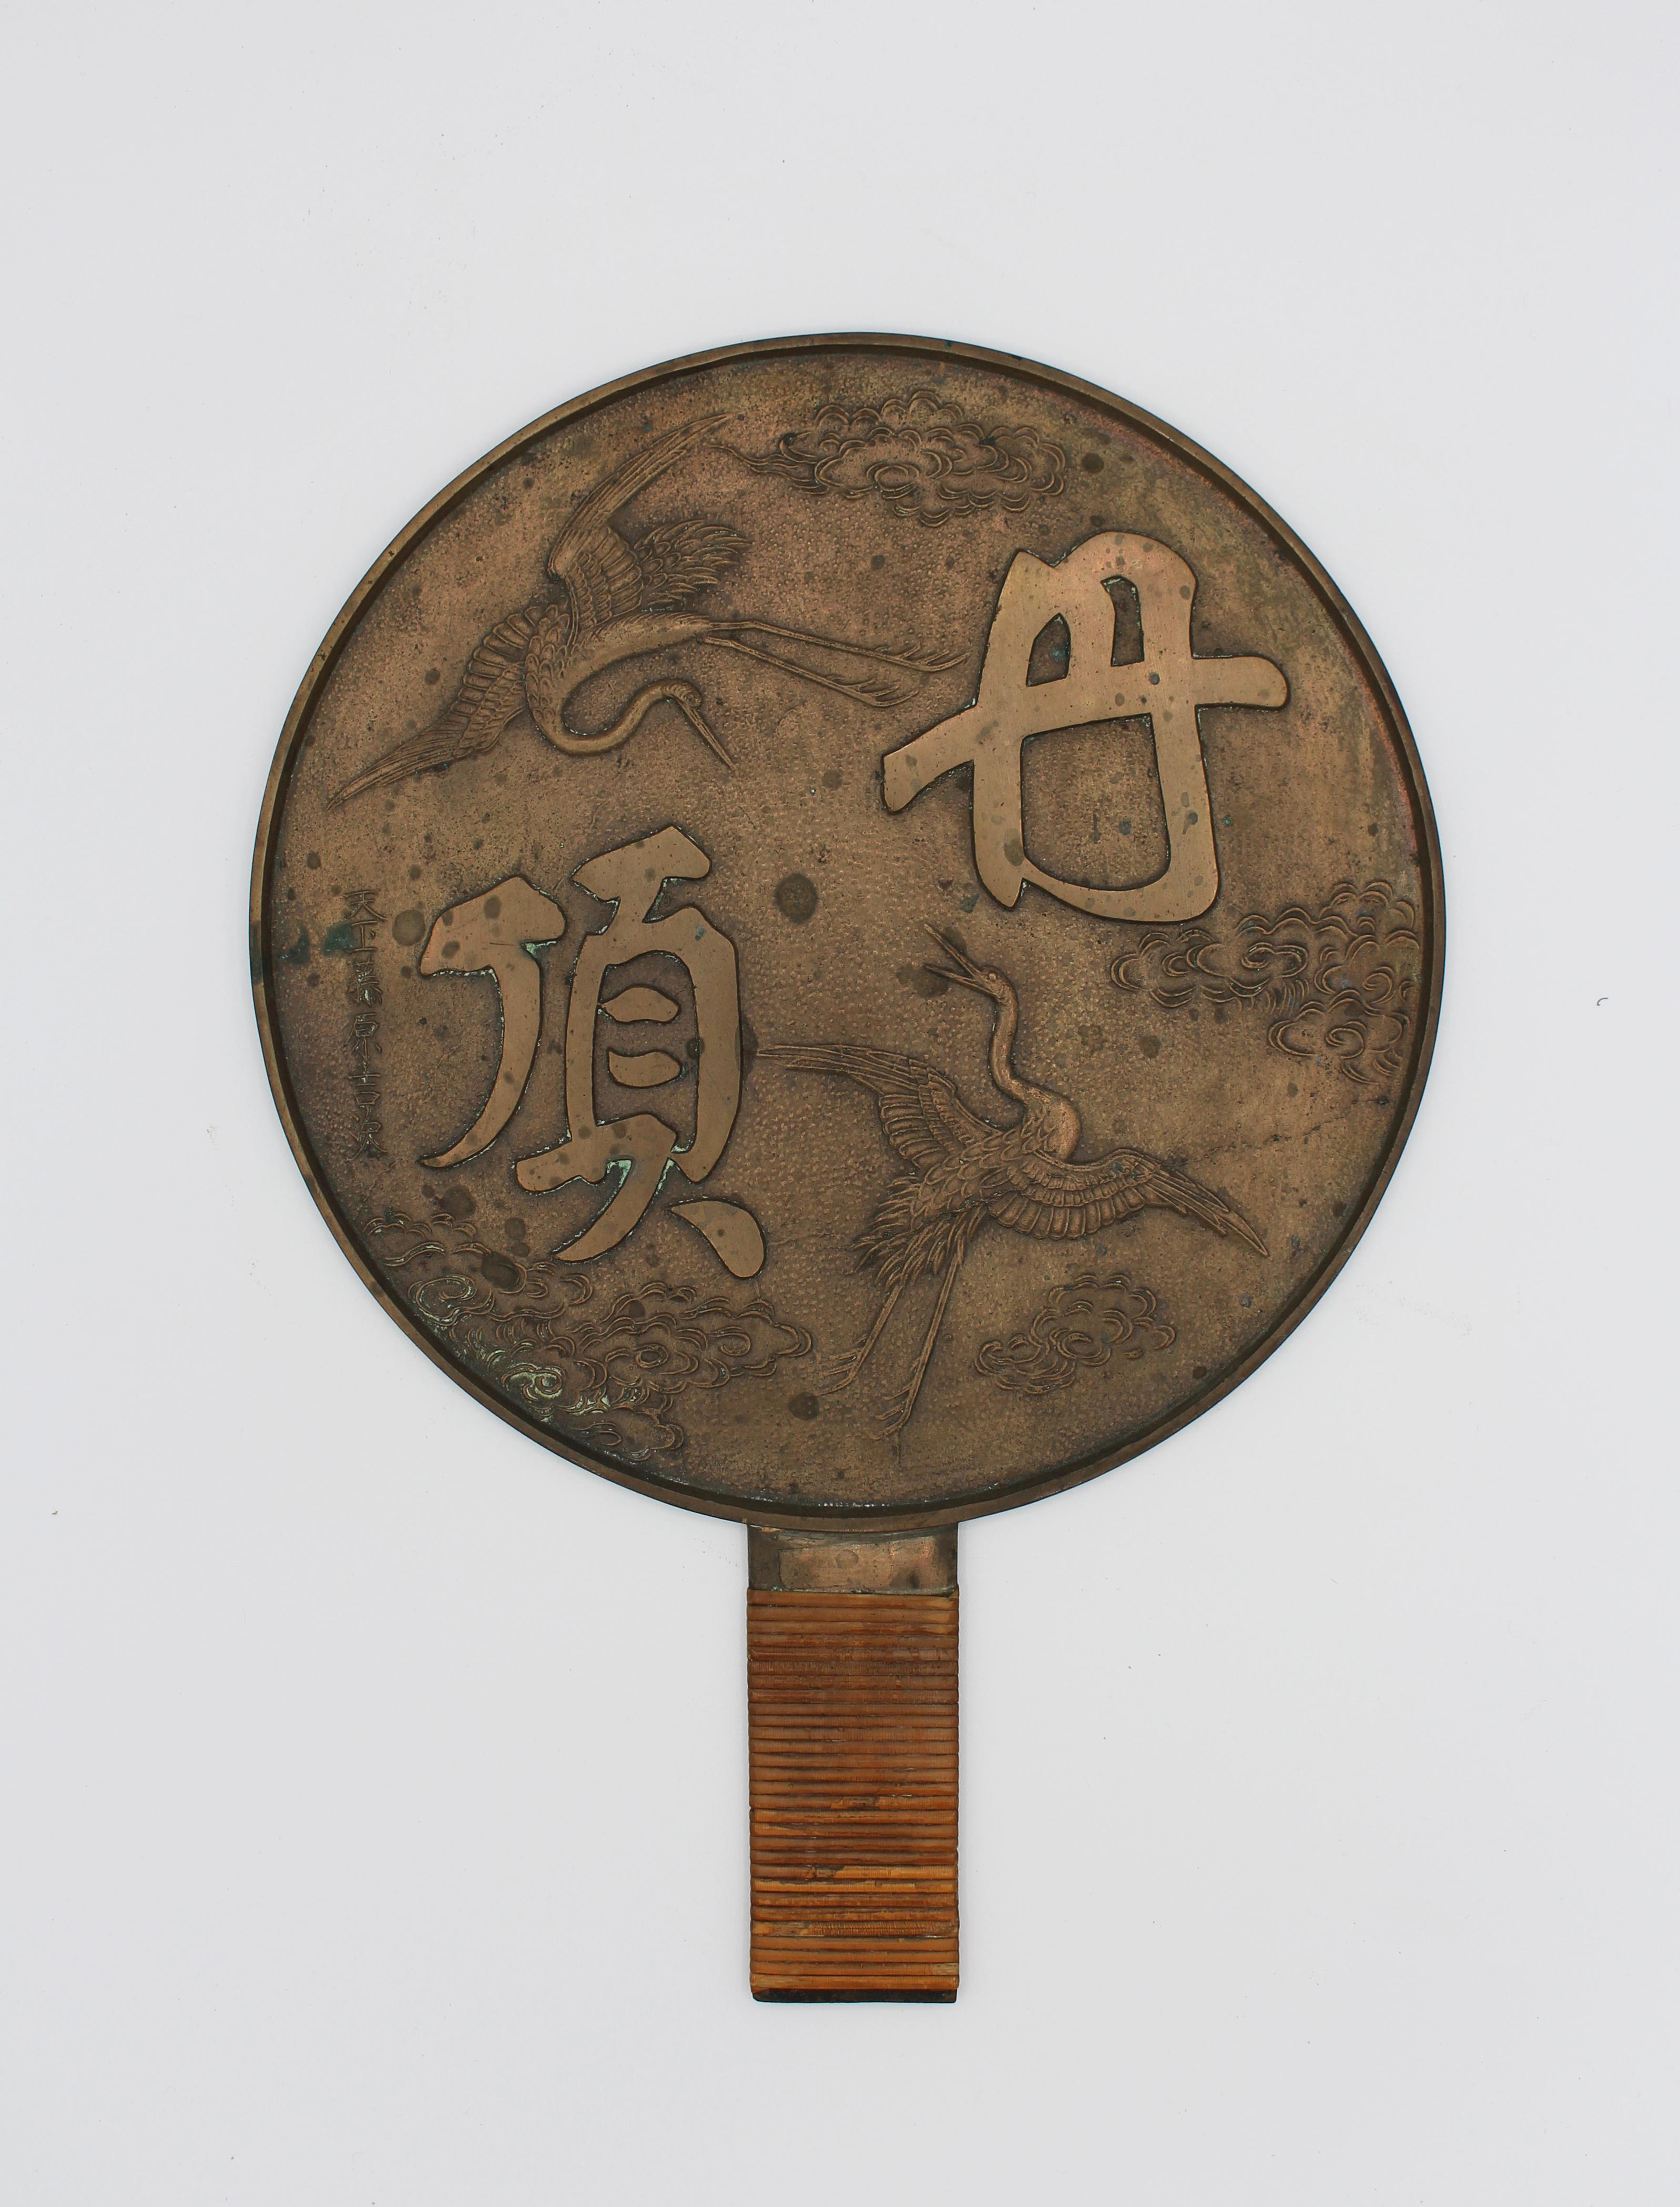 A Japanese bronze mirror of courting cranes with good rafia handle cover, Meiji period, 1868-1912. A very nice example, often bridal gifts. 9 1/2